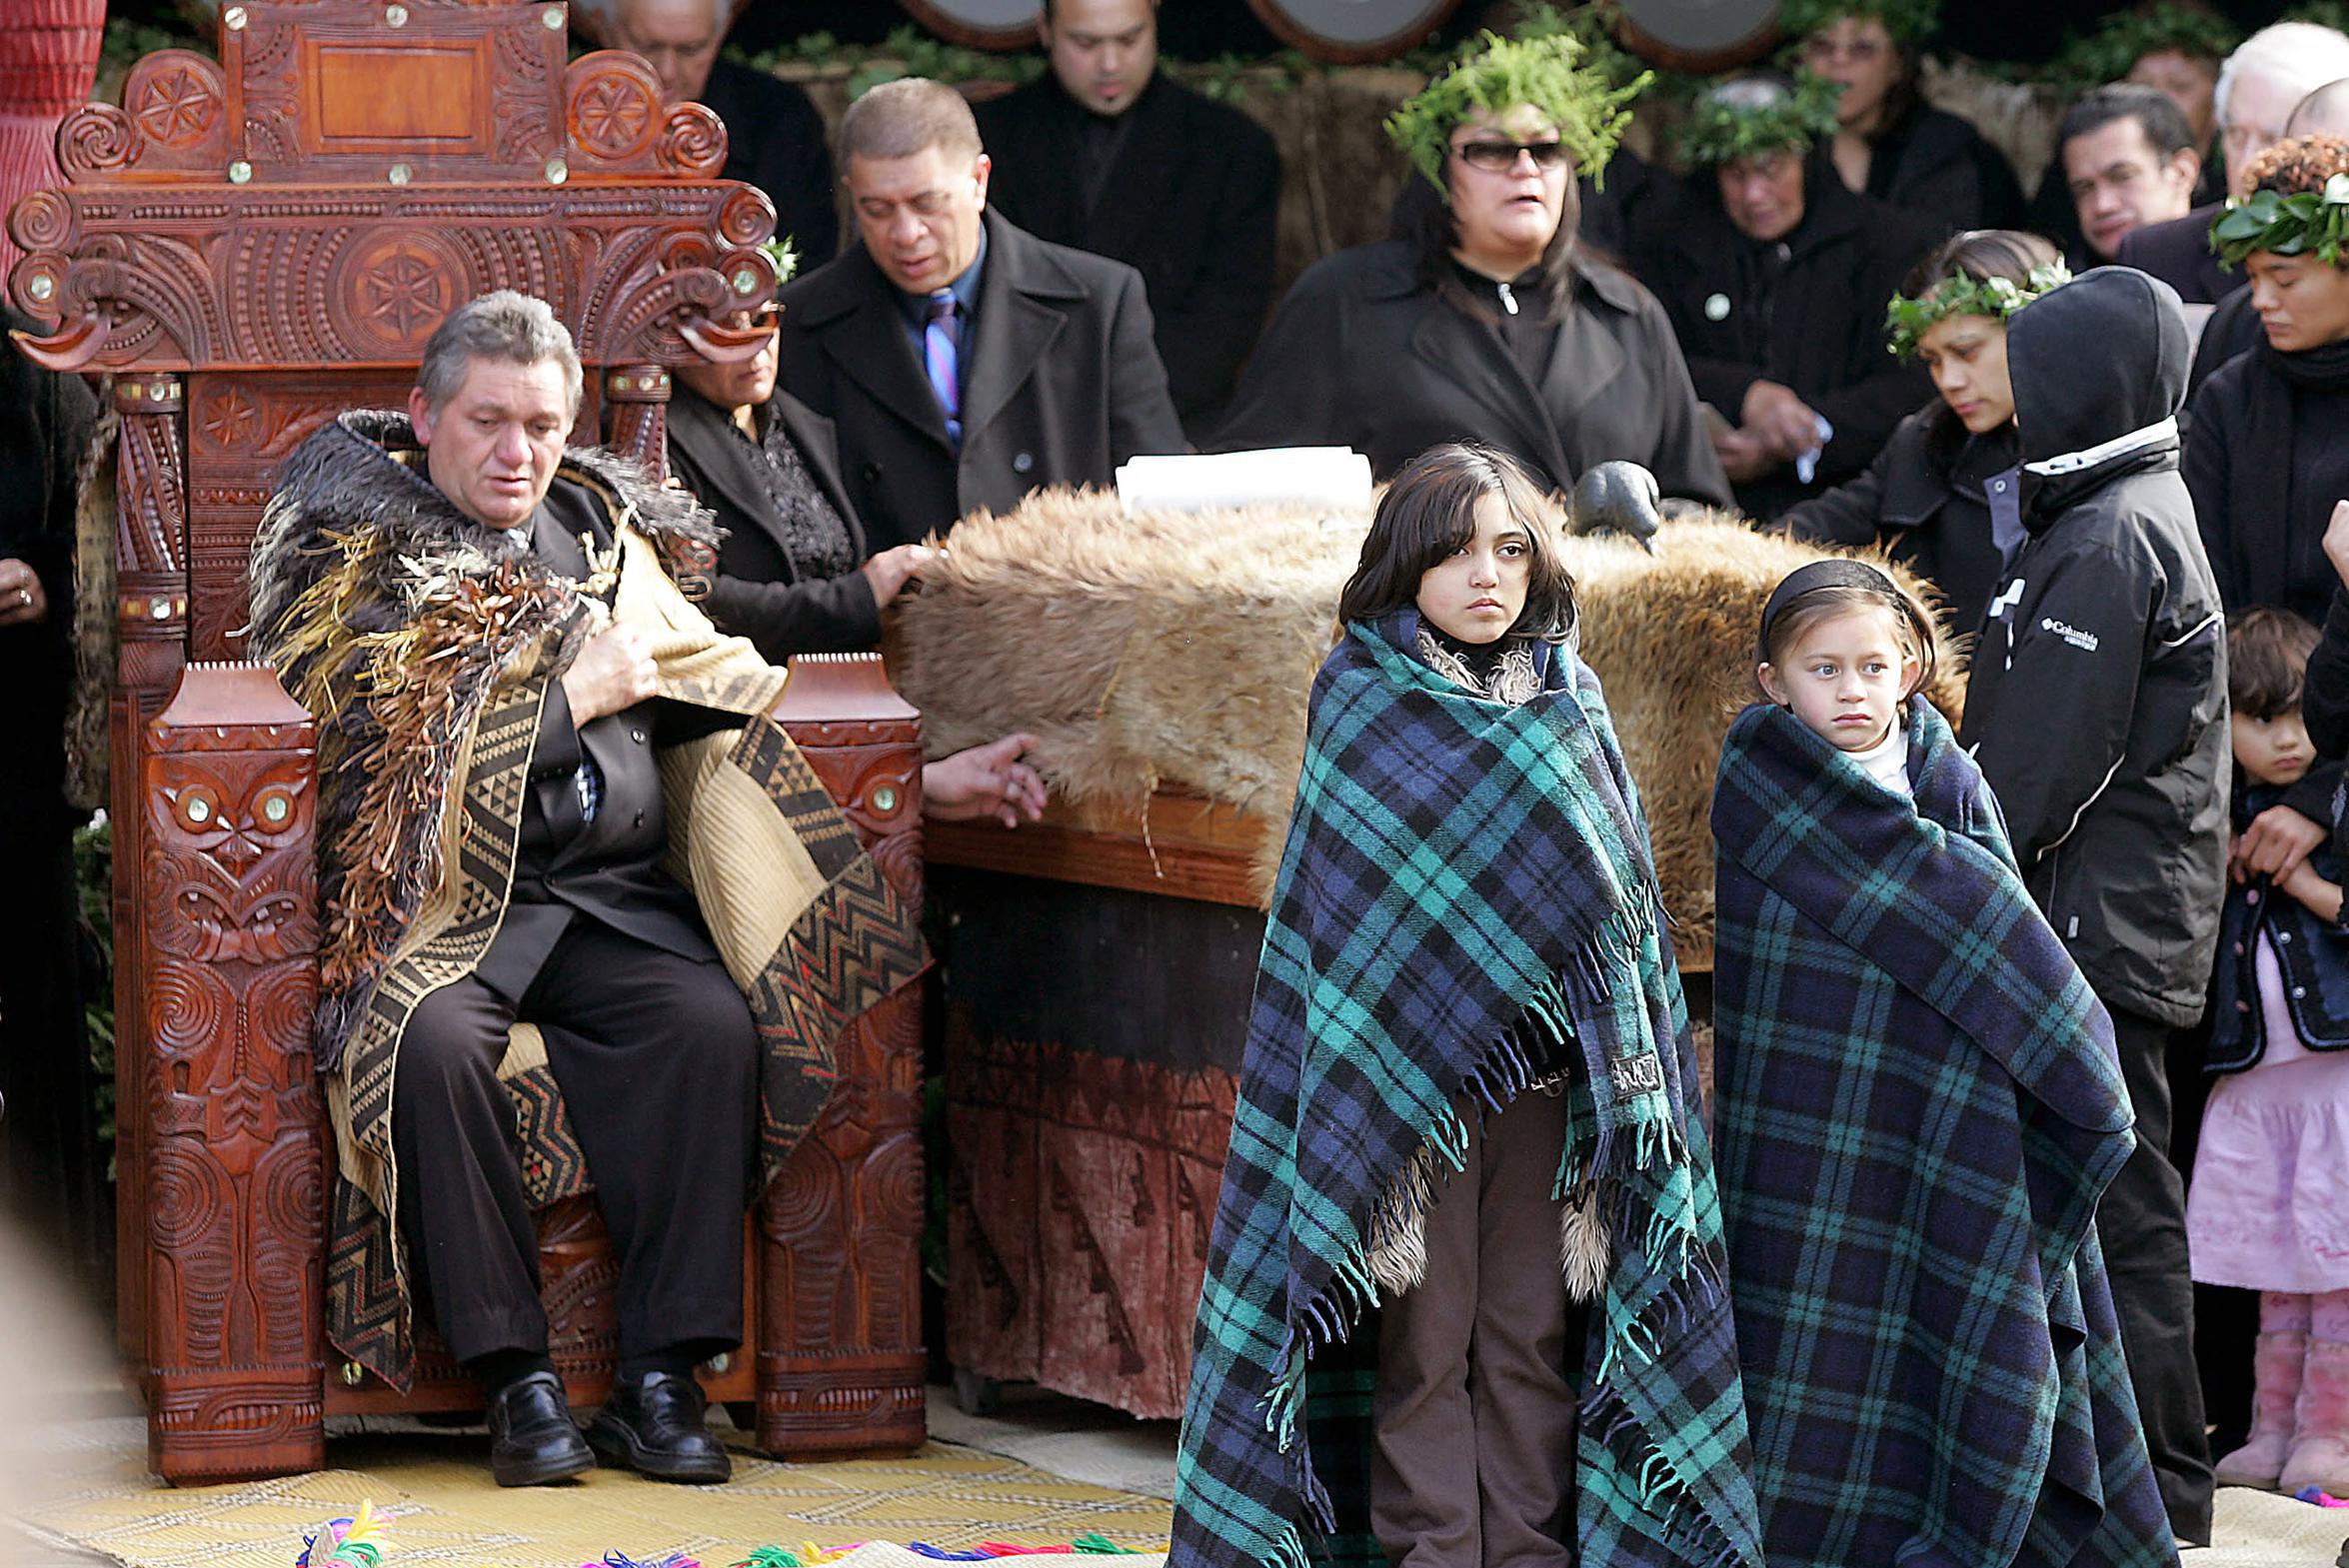 Maori king travels to Queen’s funeral with New Zealand Prime Minister